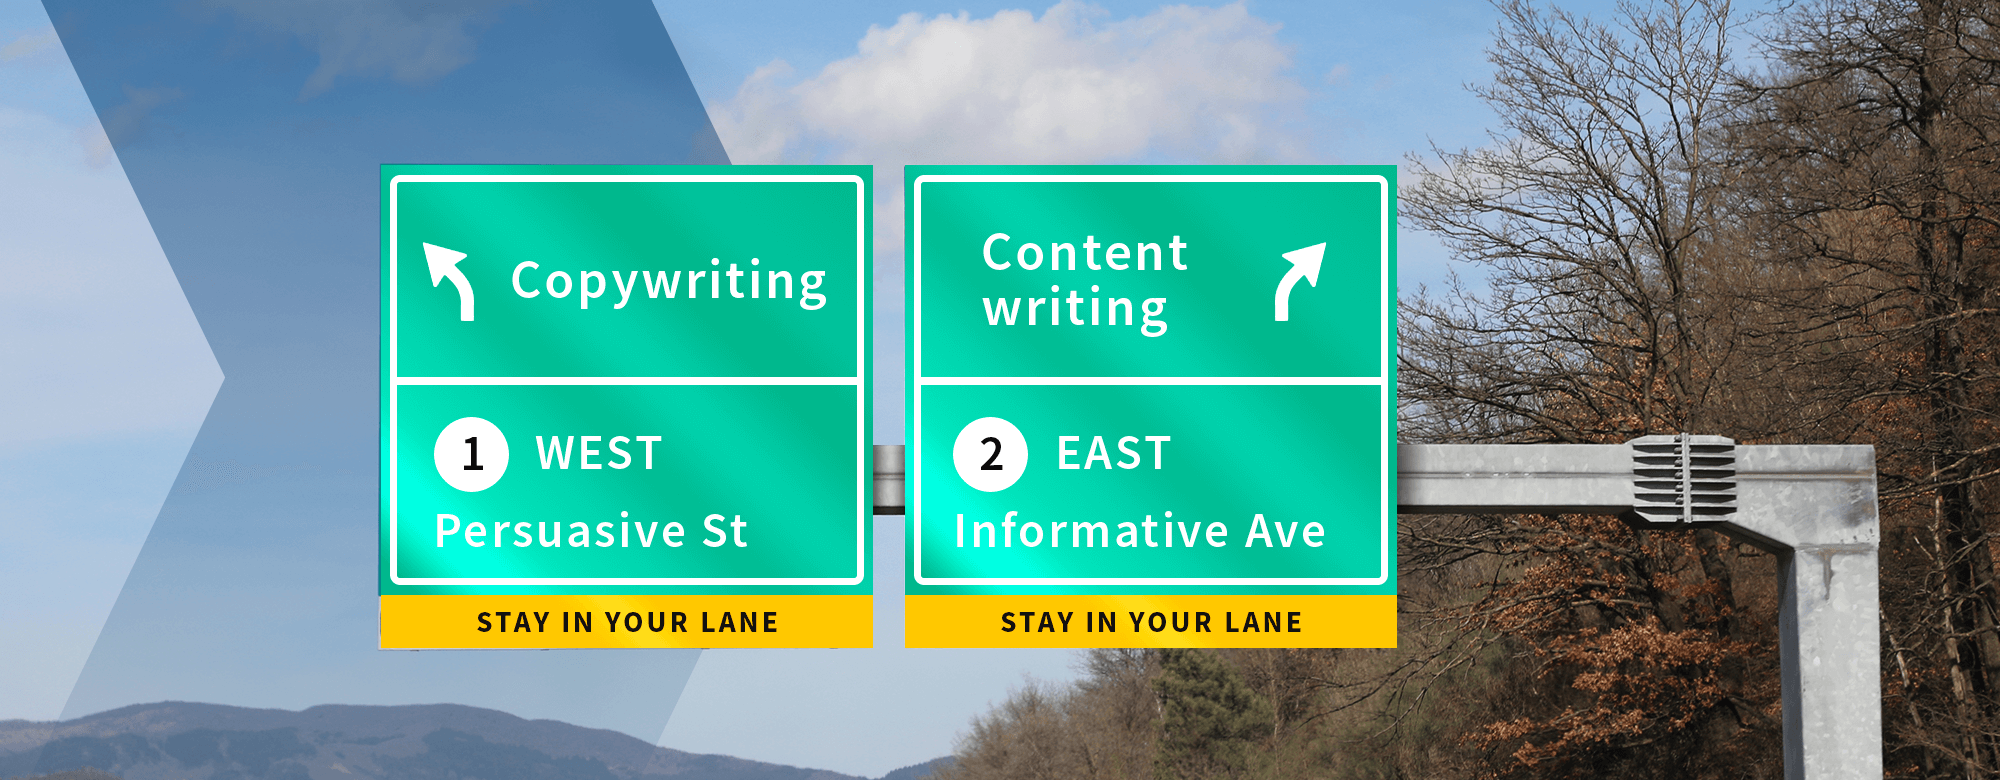 Content writing vs. copywriting: What's the difference?